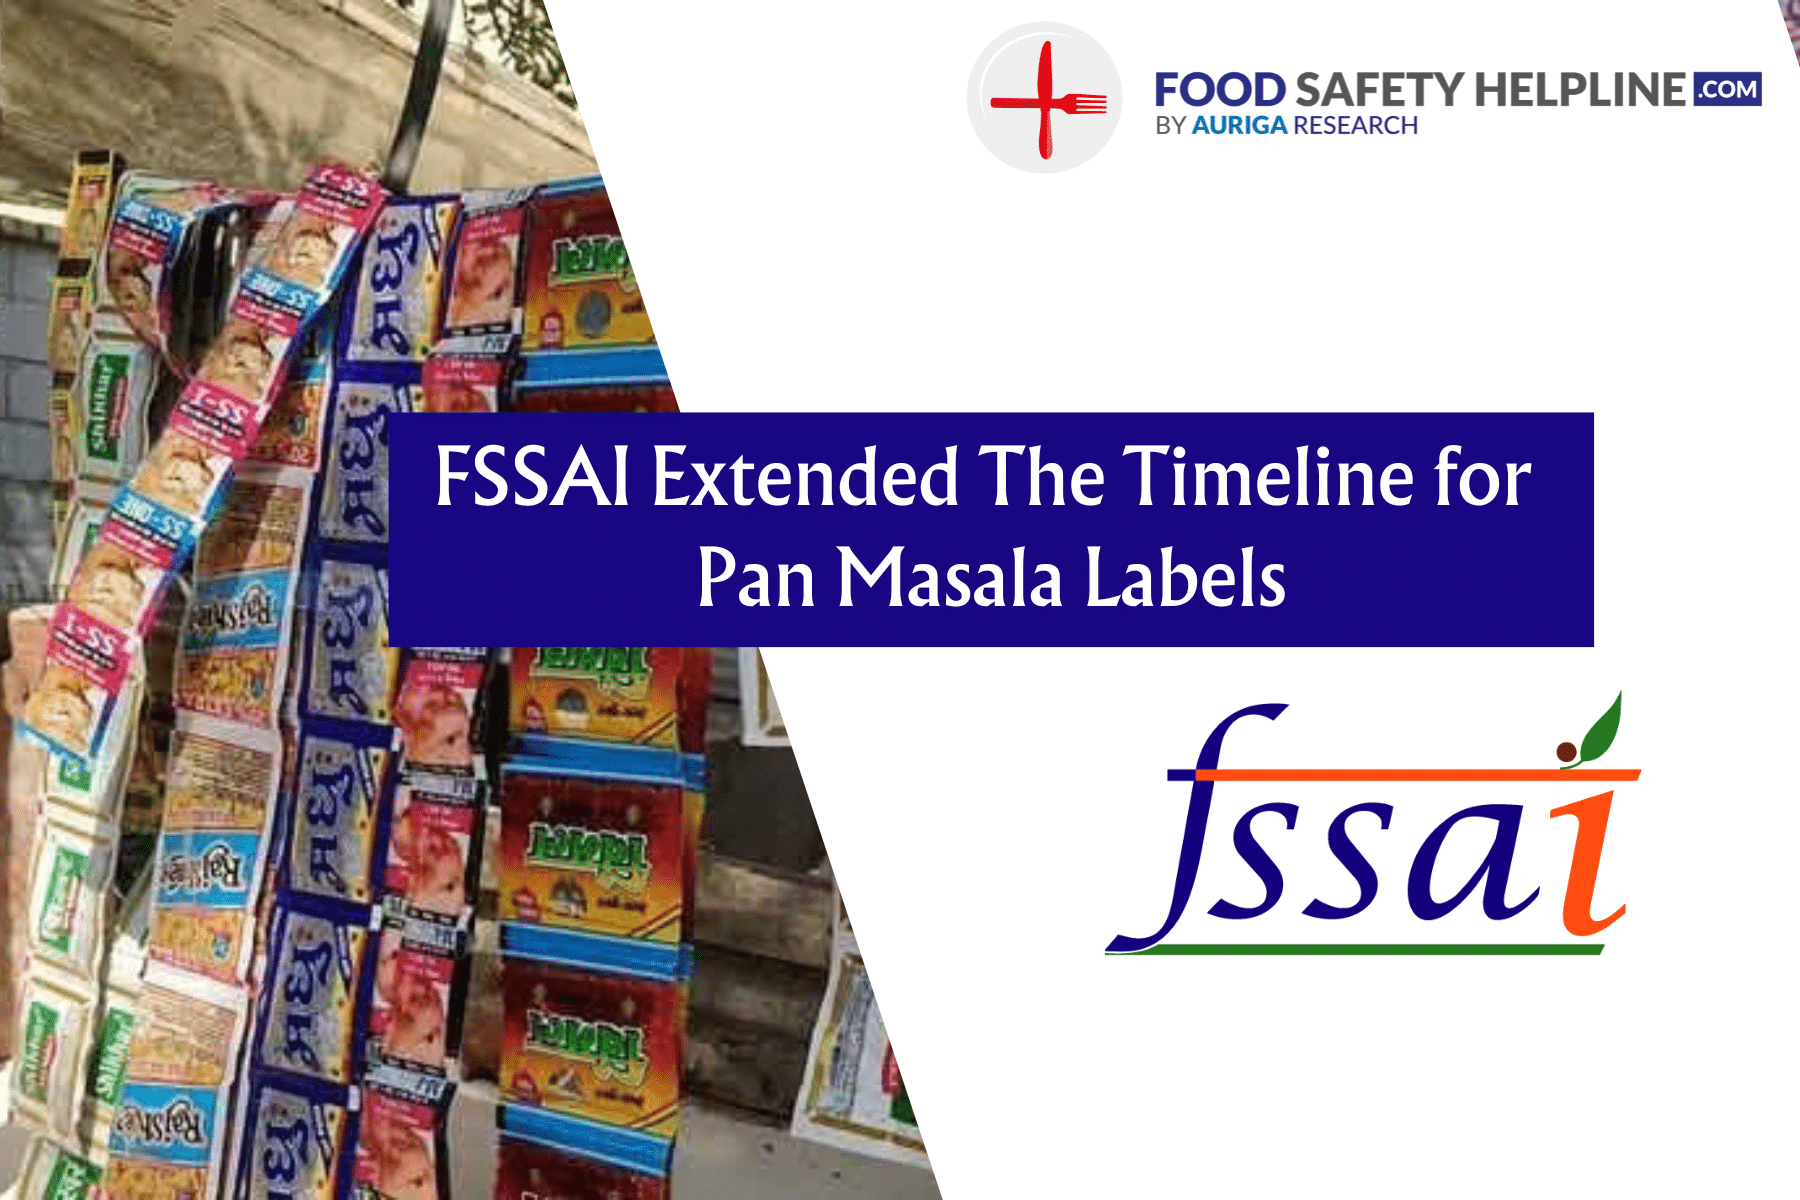 FSSAI Extended The Timeline for Pan Masala Labels